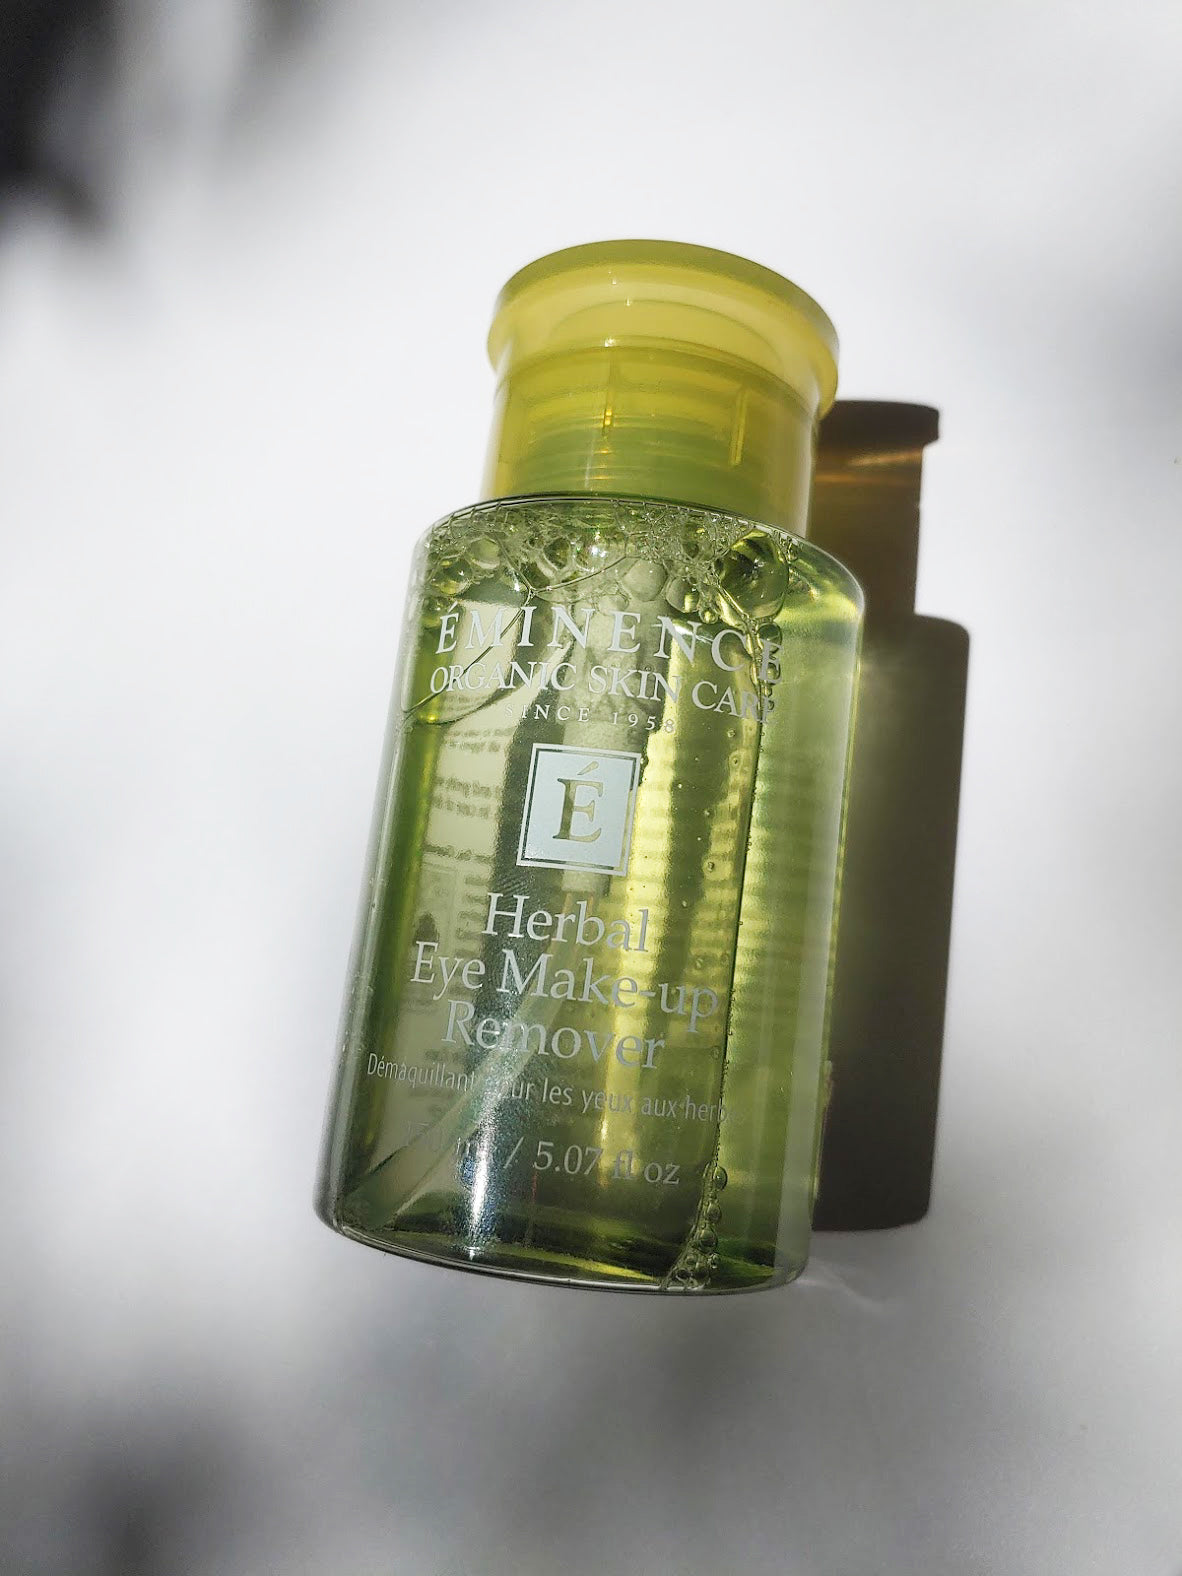 a bottle of the herbal eye mak-up remover by Eminence. The bottle isa bright lime green color.